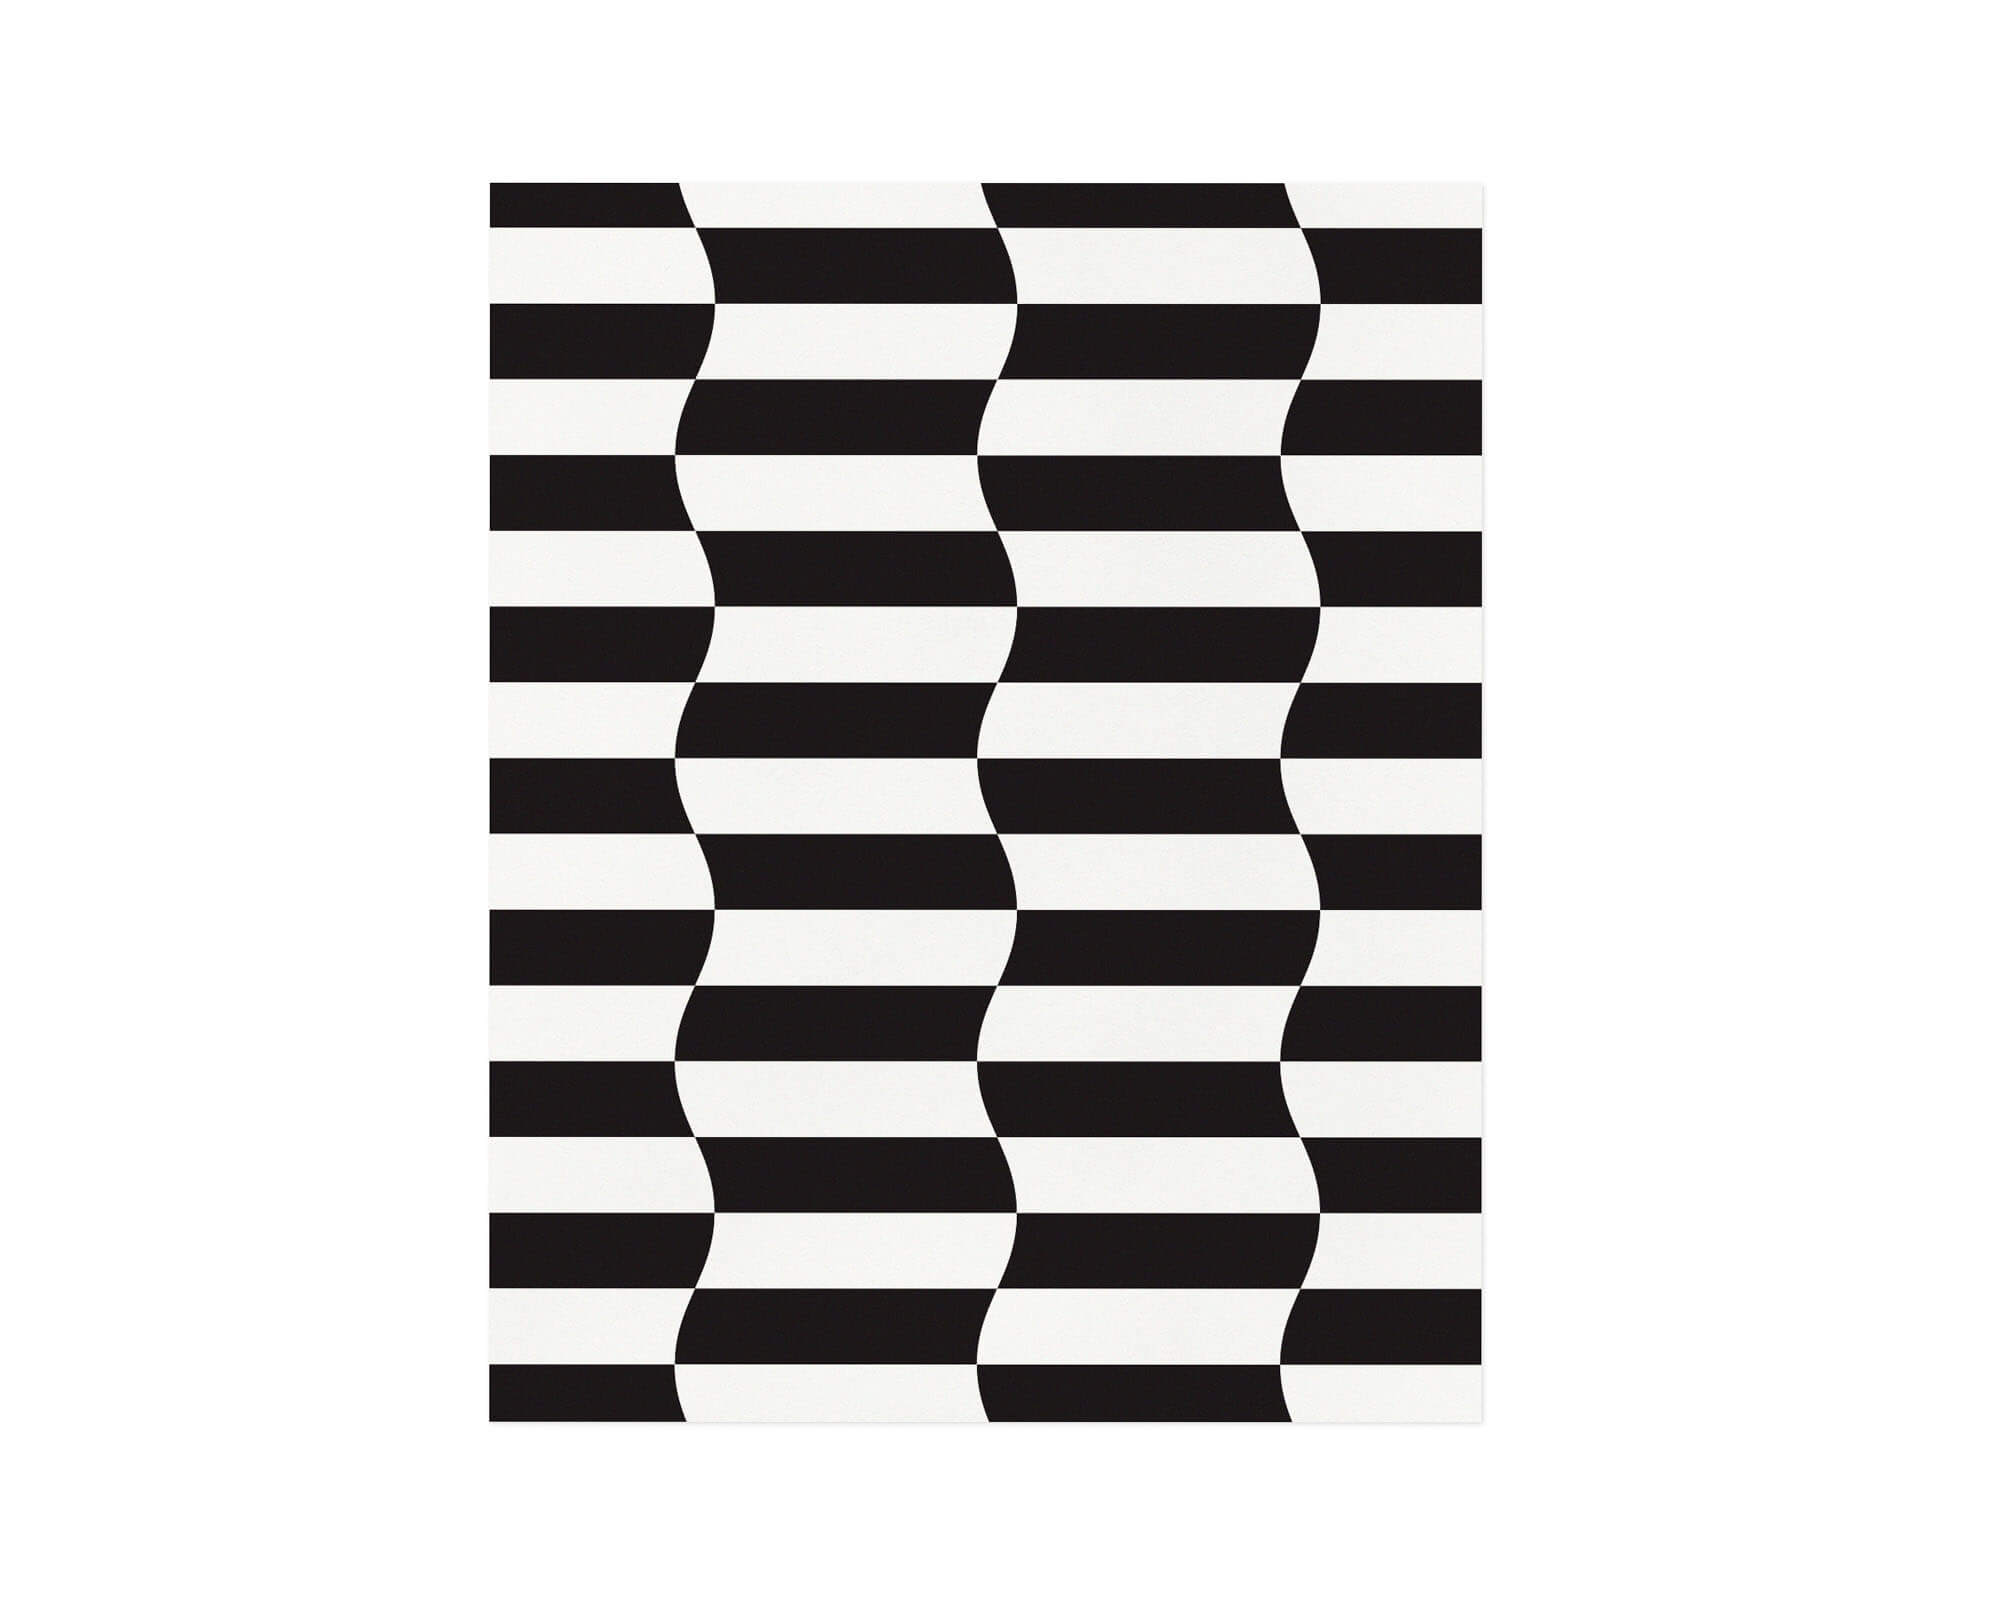 "Striple Double" hypnotic wavy checker op art inspired black and white striped archival giclée art print. Made in USA by My Darlin' @mydarlin_bk